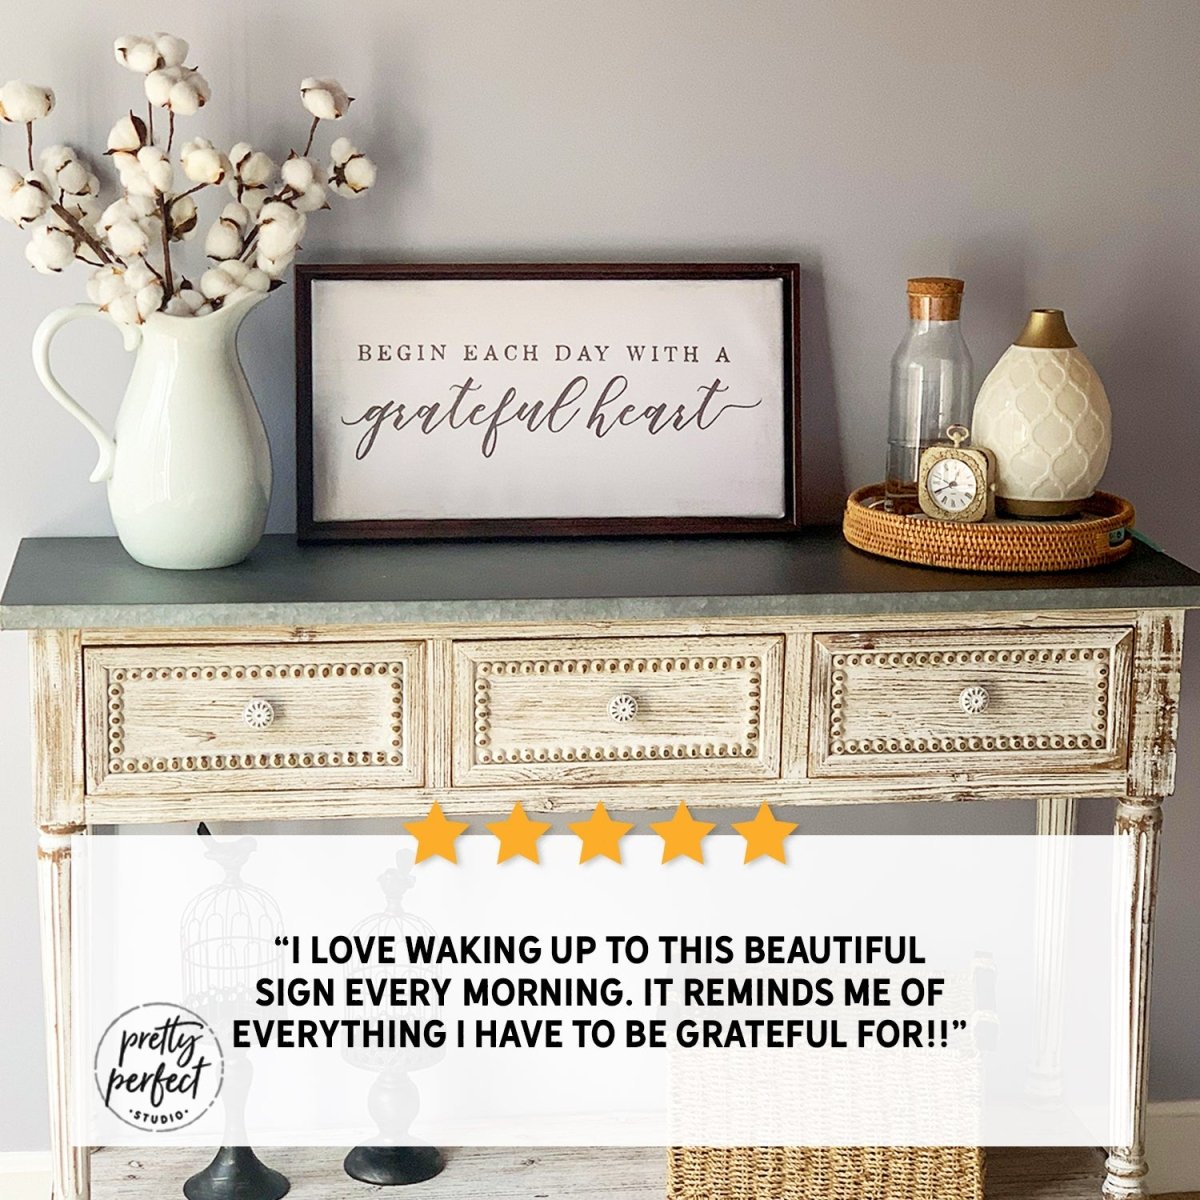 Customer product review for begin each day with a grateful heart sign by Pretty Perfect Studio